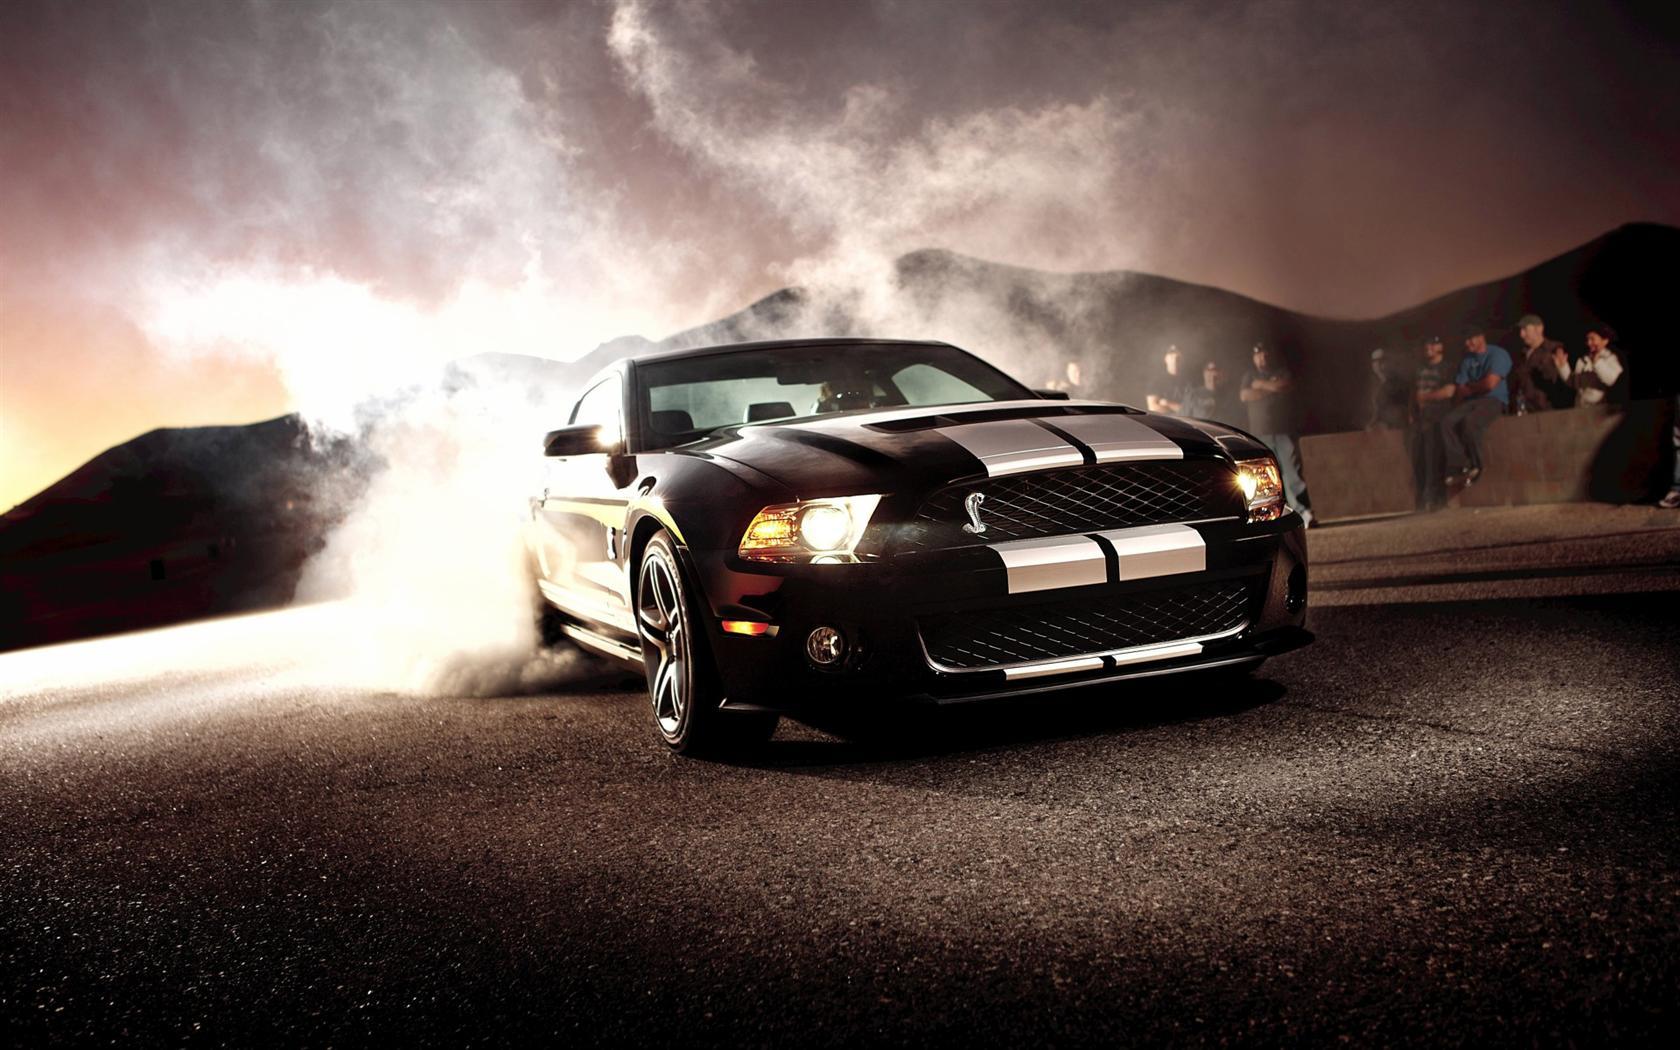 Shelby Mustang GT500 Image. Photo: 2012 Shelby Mustang GT500